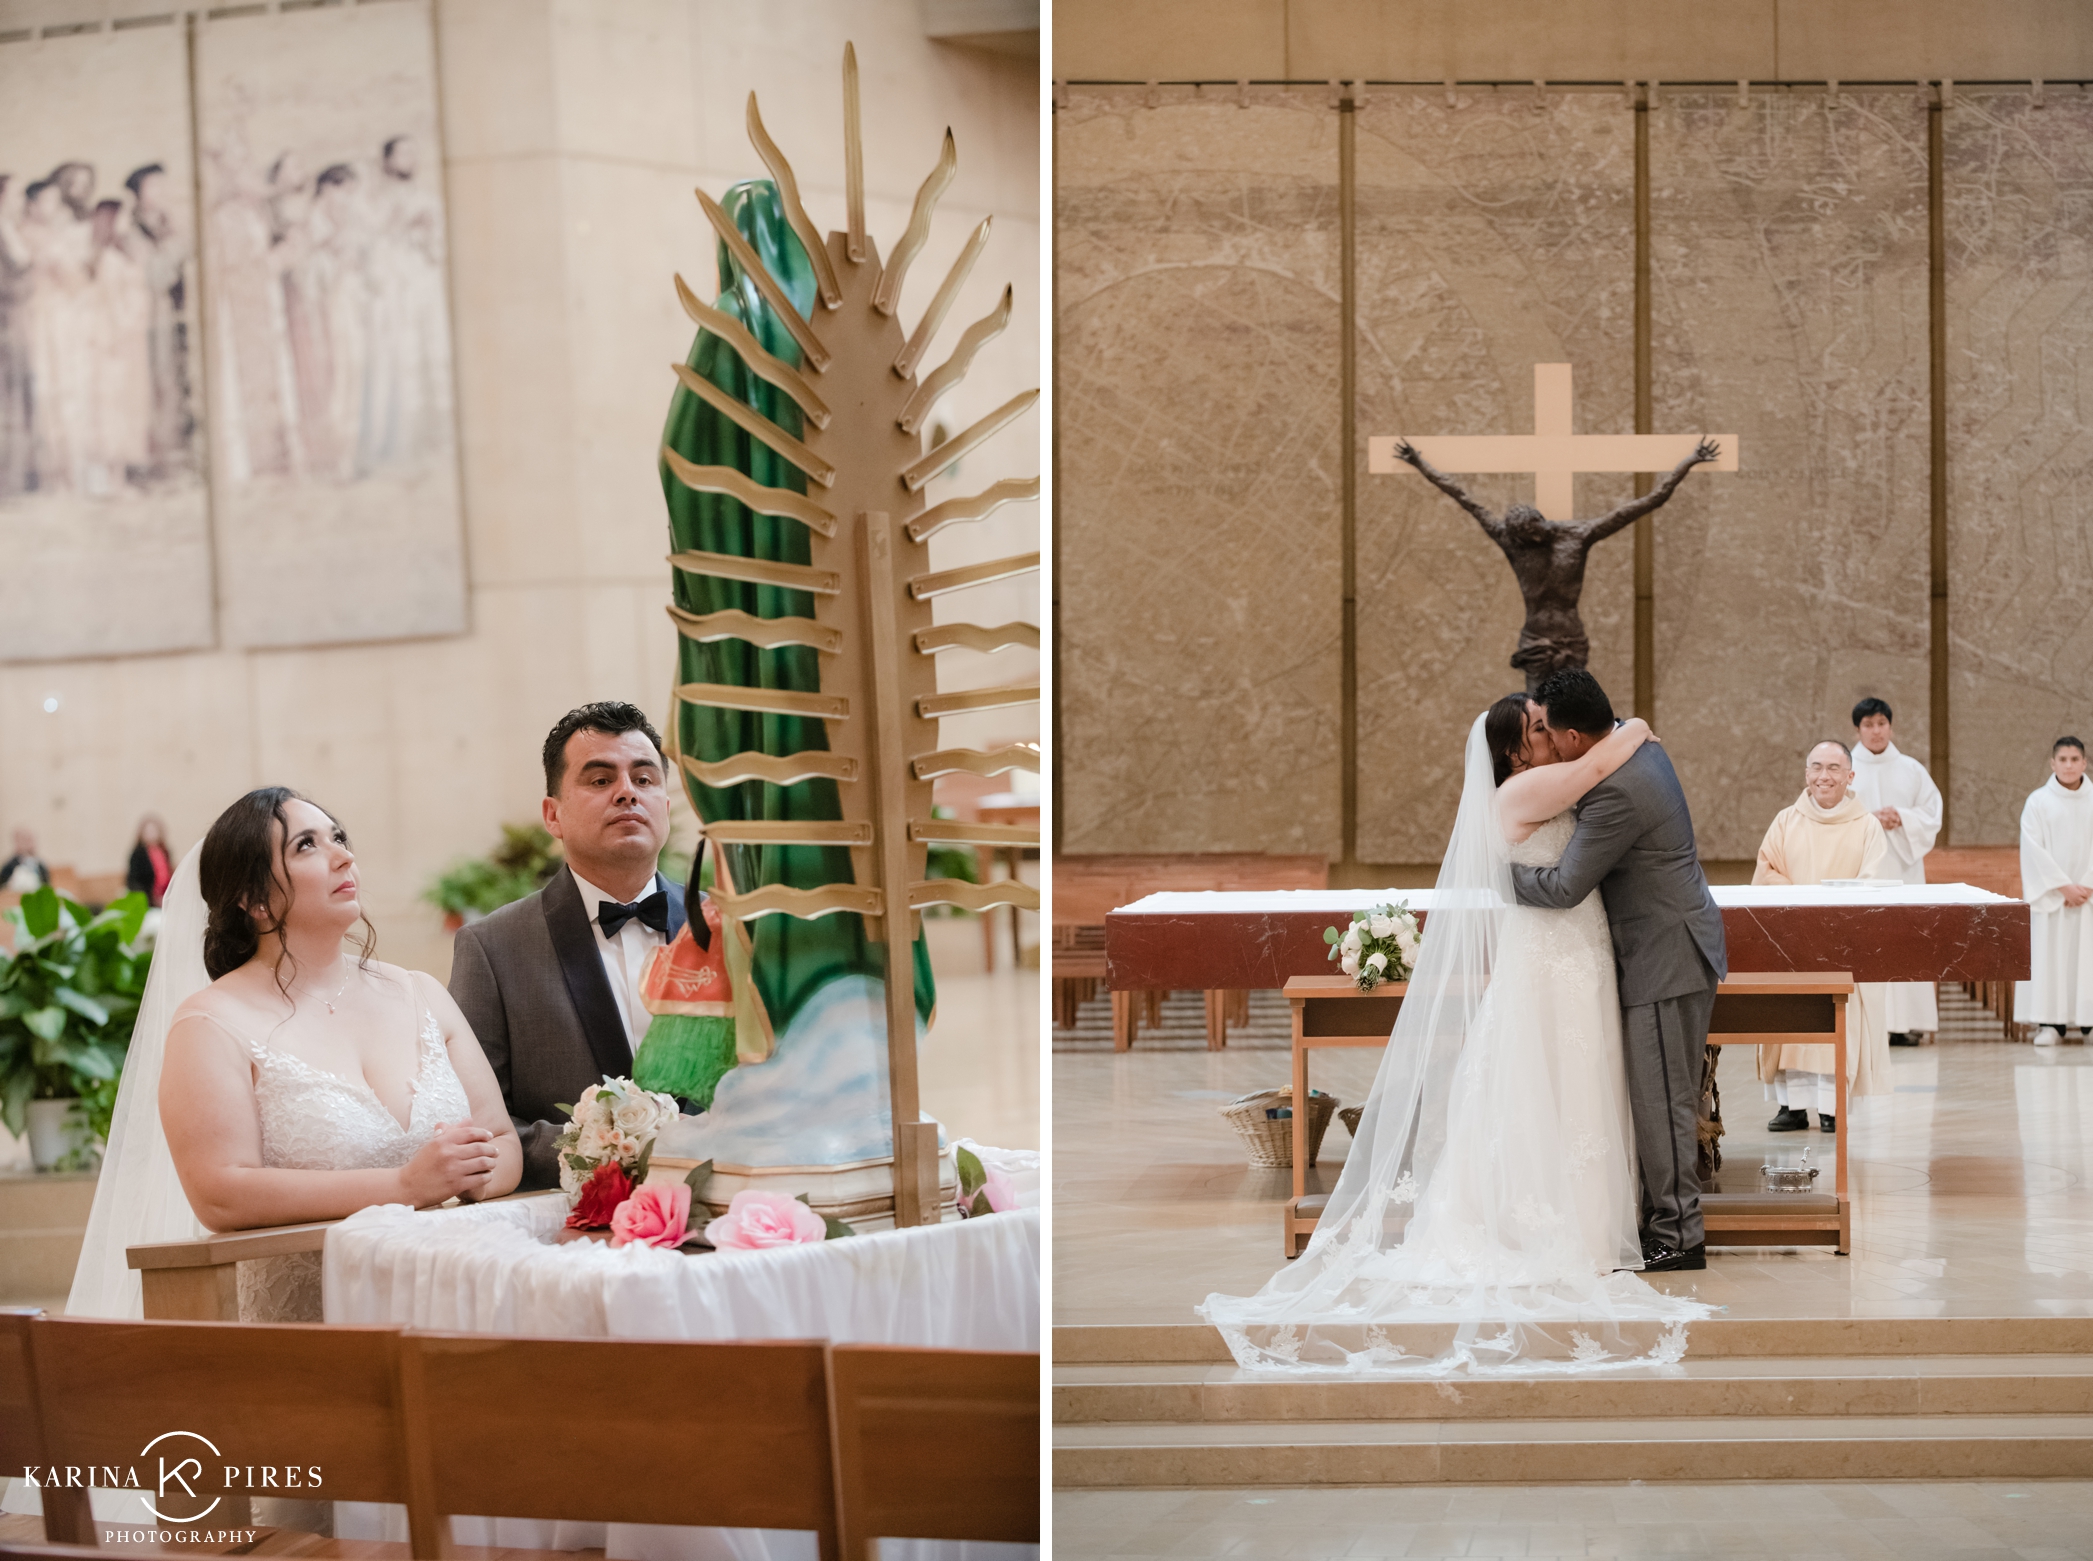 Jennifer and Ronaldo’s wedding ceremony at the Cathedral of Our Lady of the Angels